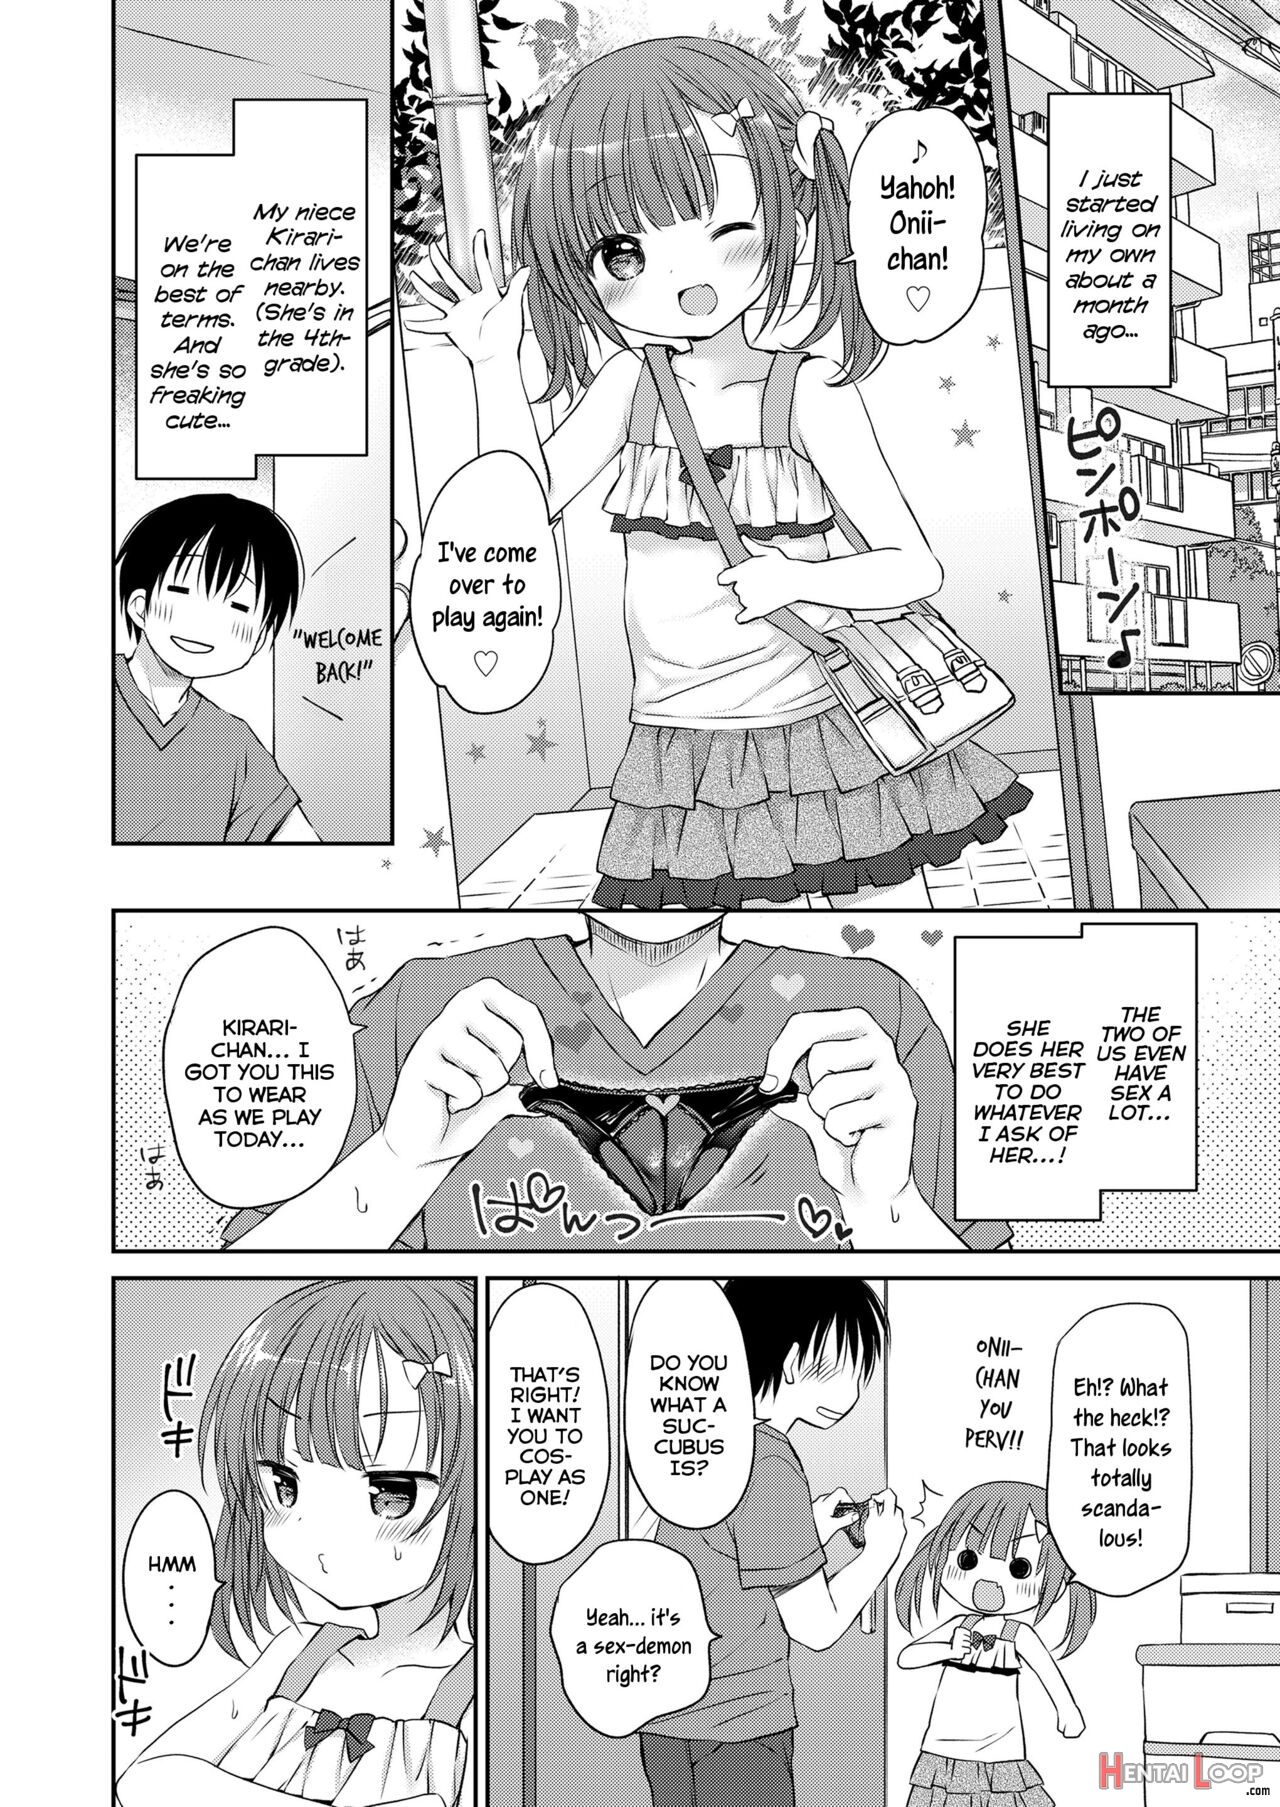 Cosplaying Sex With A Cute-erotic-loli page 2